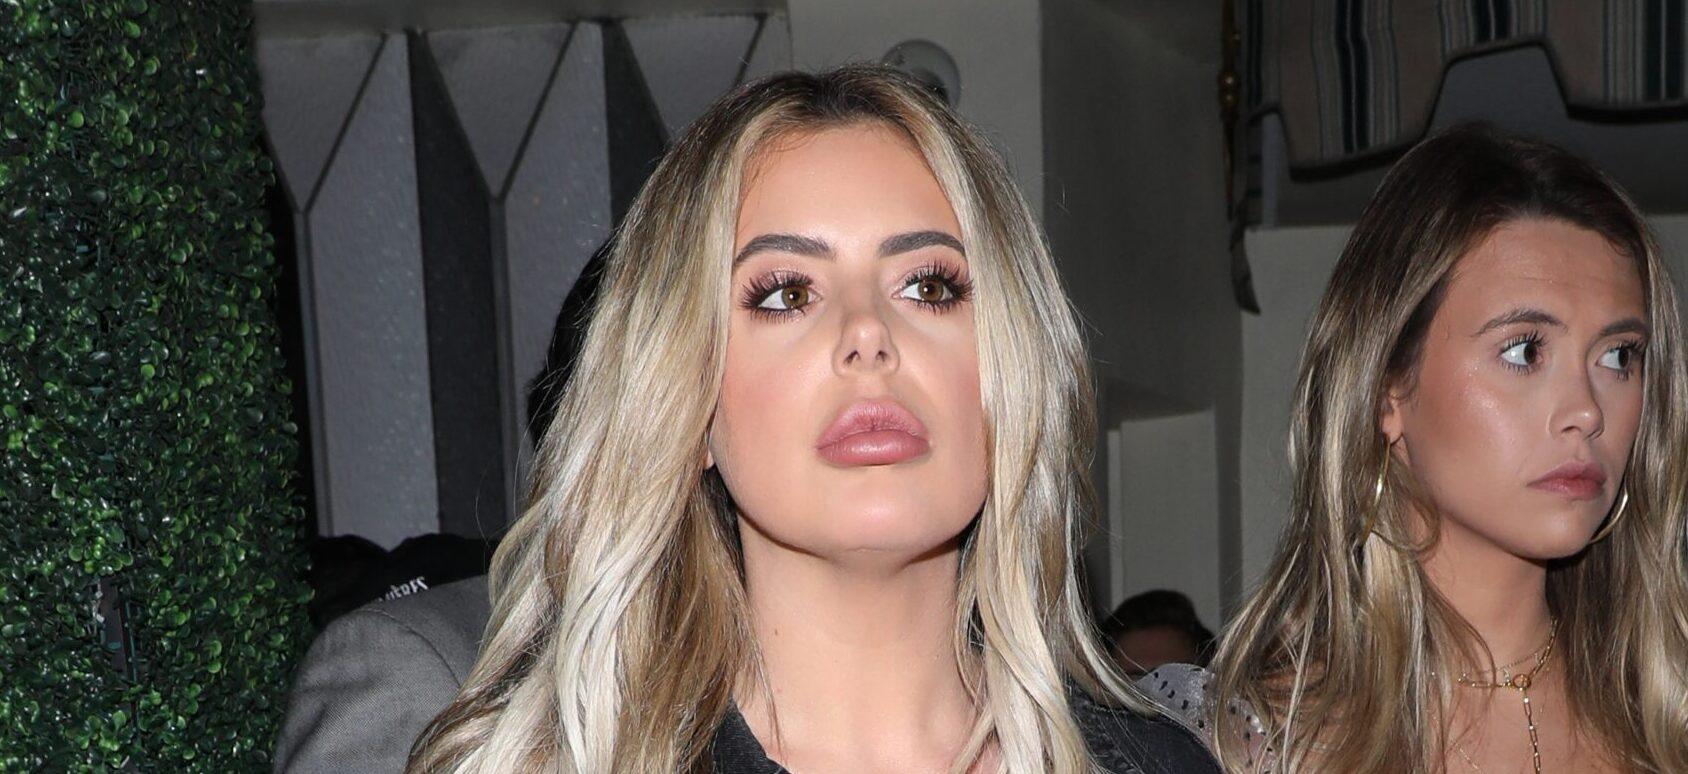 Brielle Biermann Breaks Silence On Private Relationship With Fiancé Billy Seidl